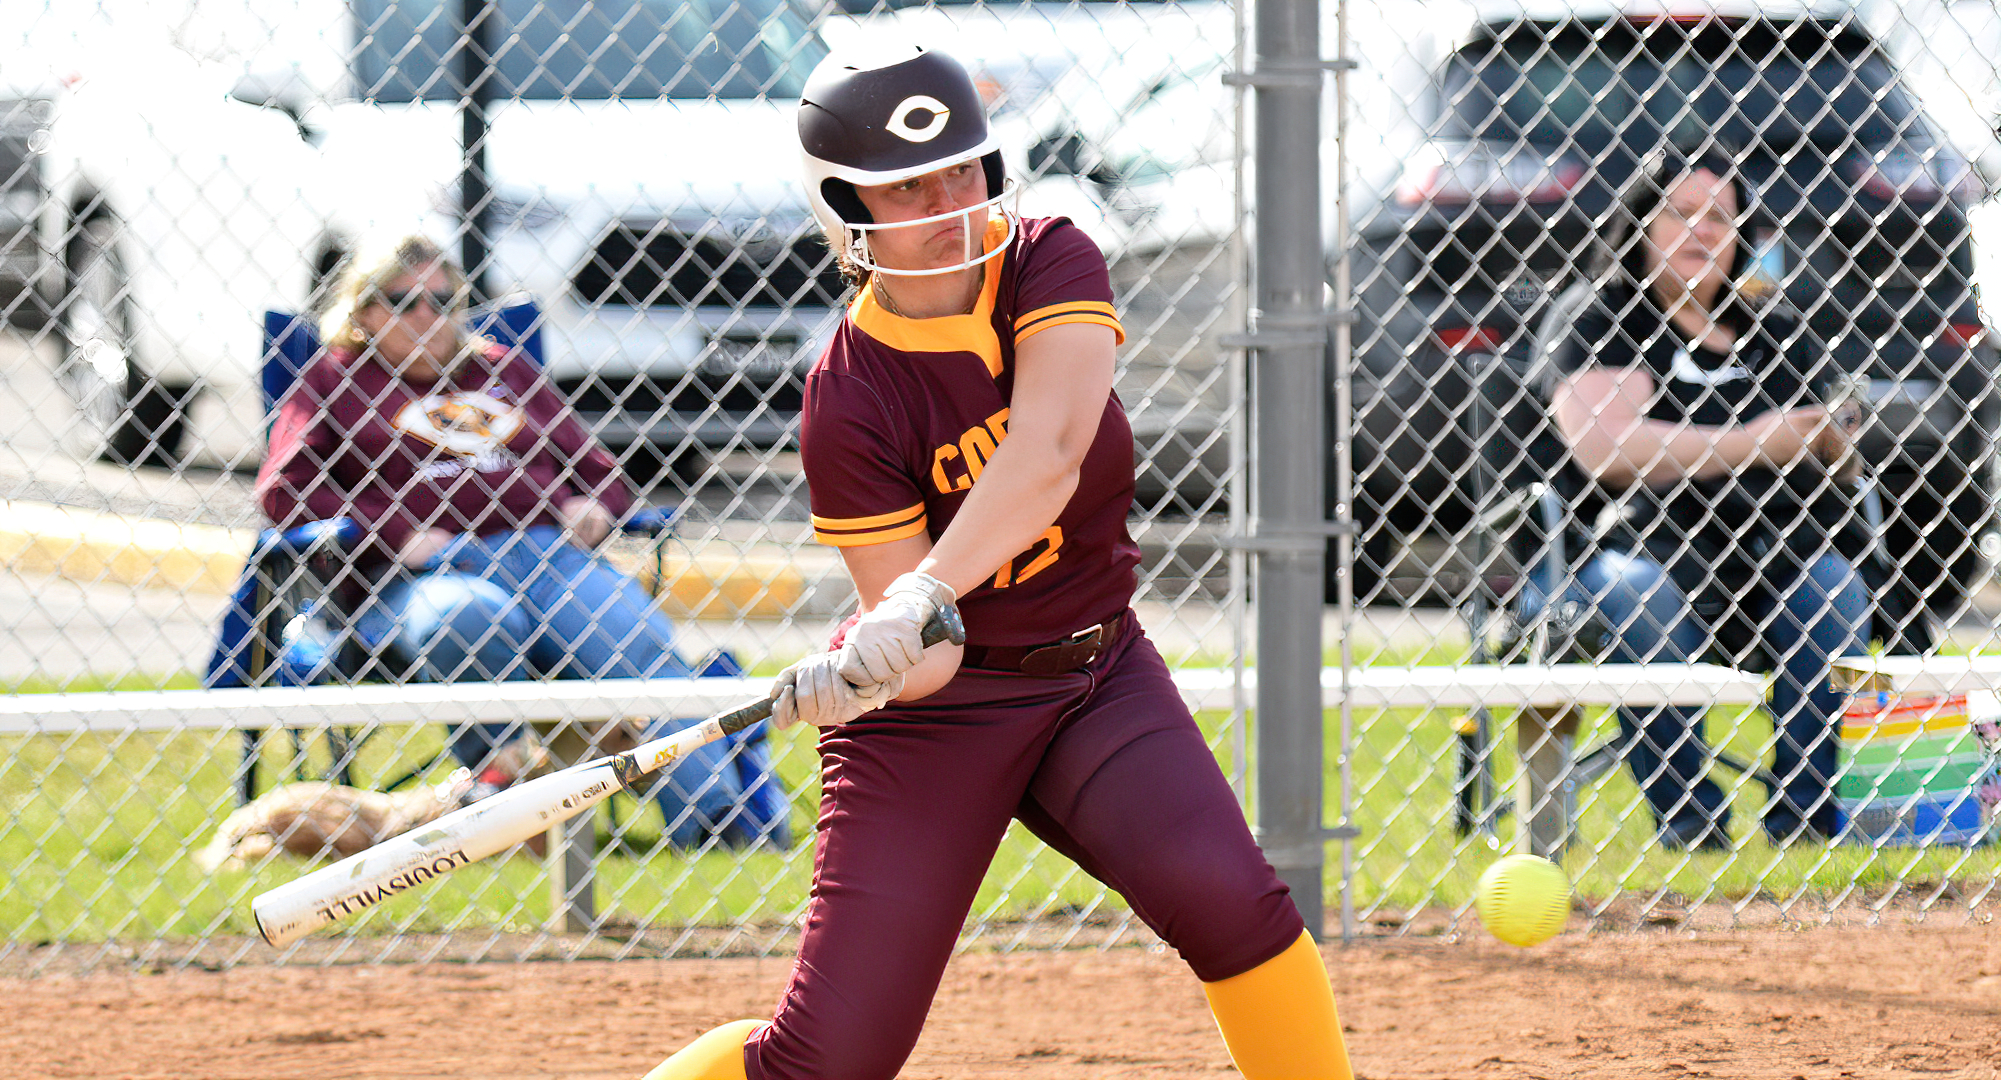 Molly Wilde hit her team-leading fifth home run of the year in Game 1 of the Cobbers' DH at St. Kate's. She is tied for the MIAC lead in long balls.